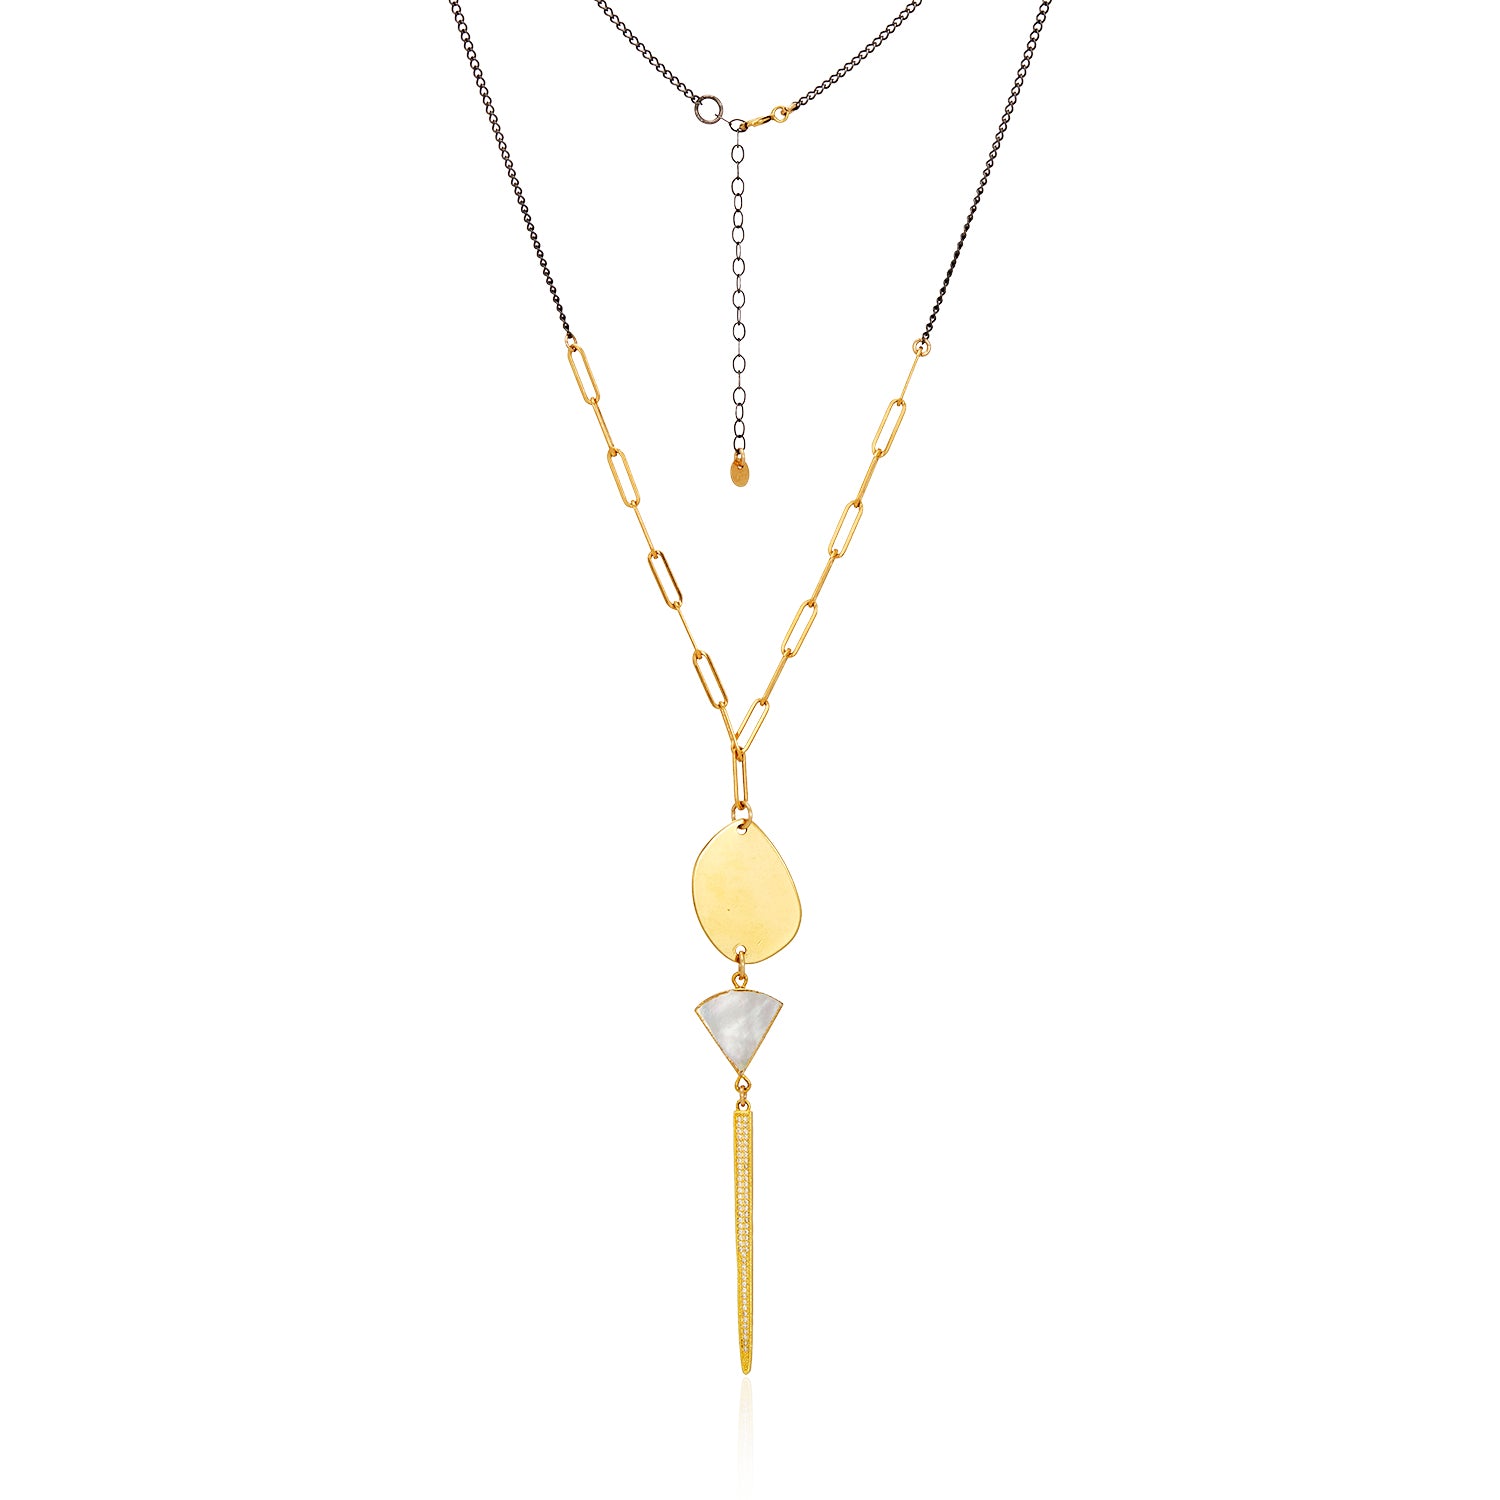 Trio Sparkly Gold Charms Long Necklace